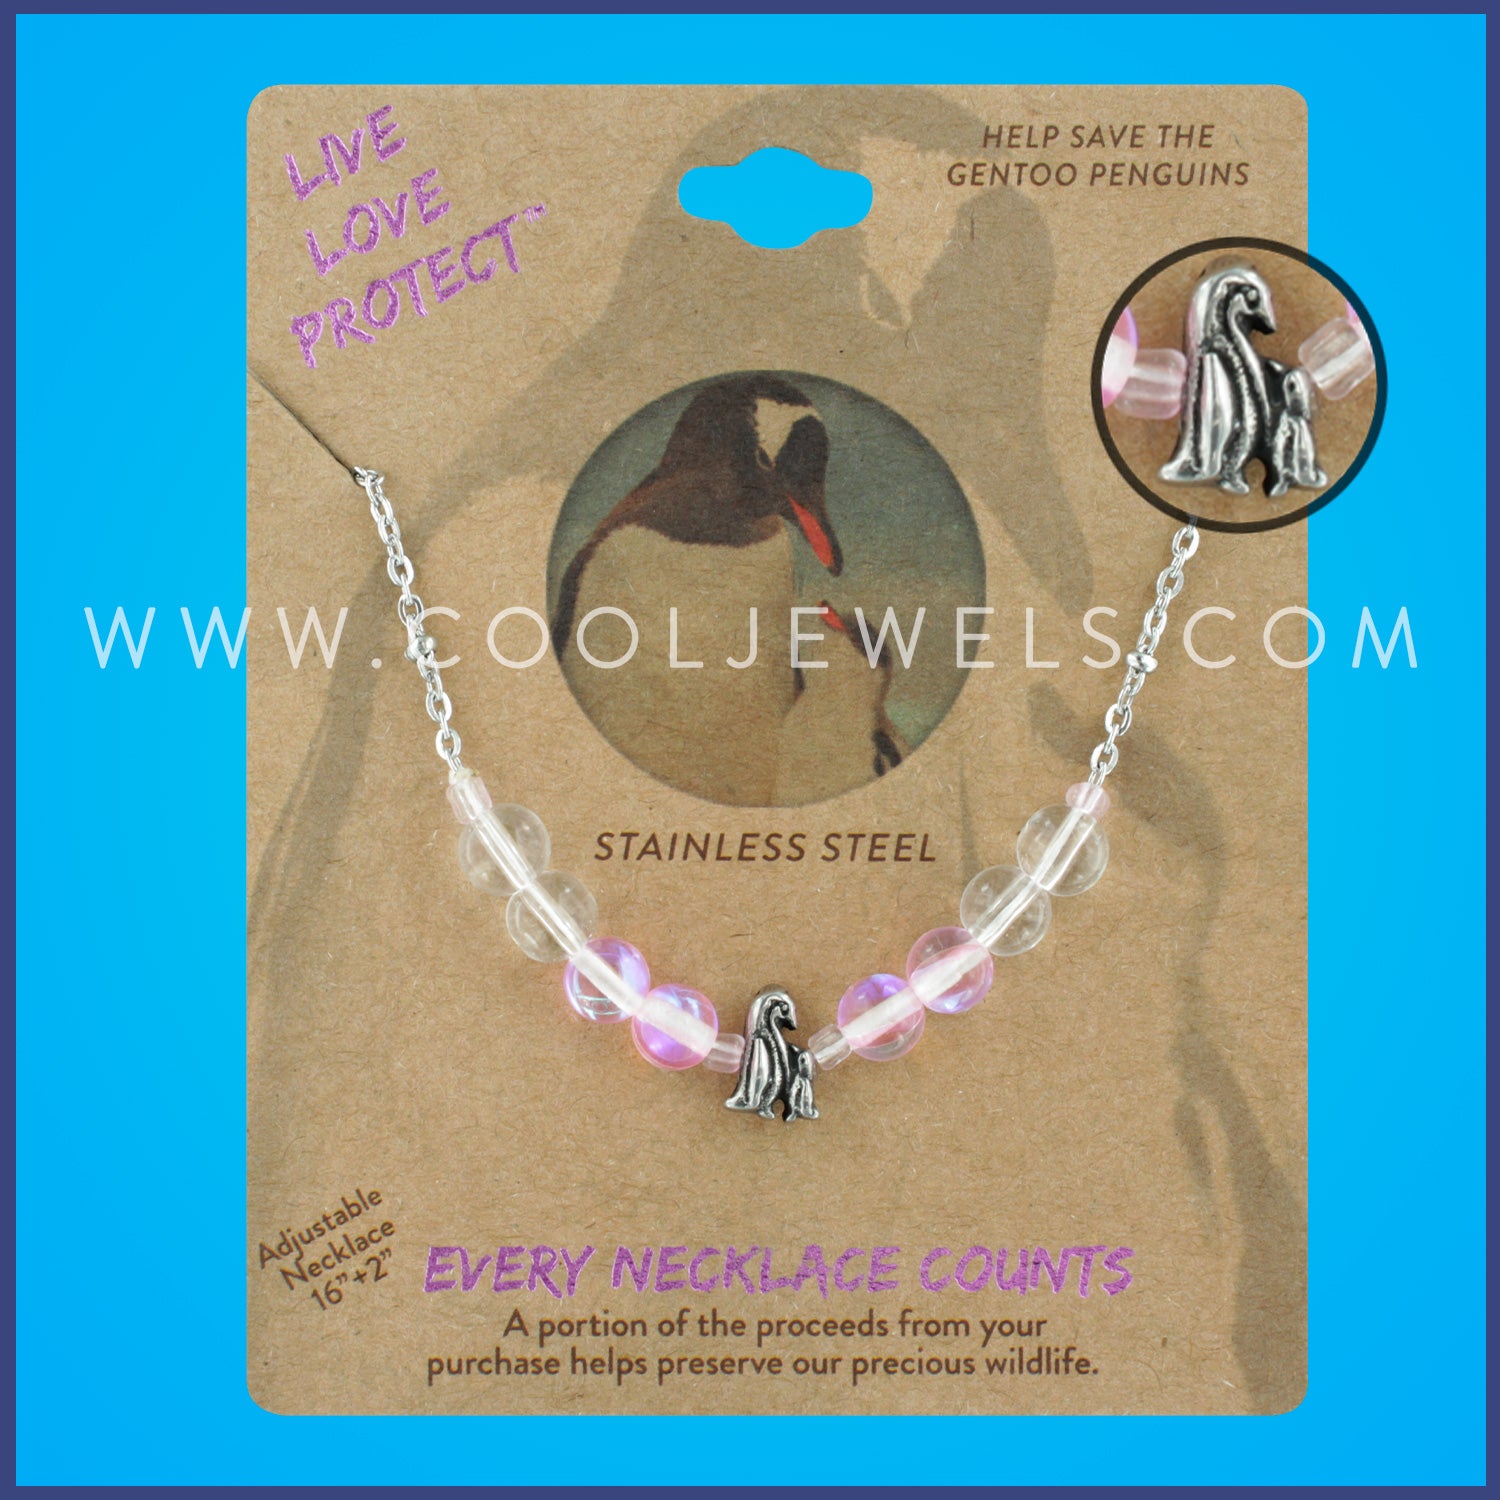 LIVE LOVE PROTECT™ NECKLACE WITH PENGUIN